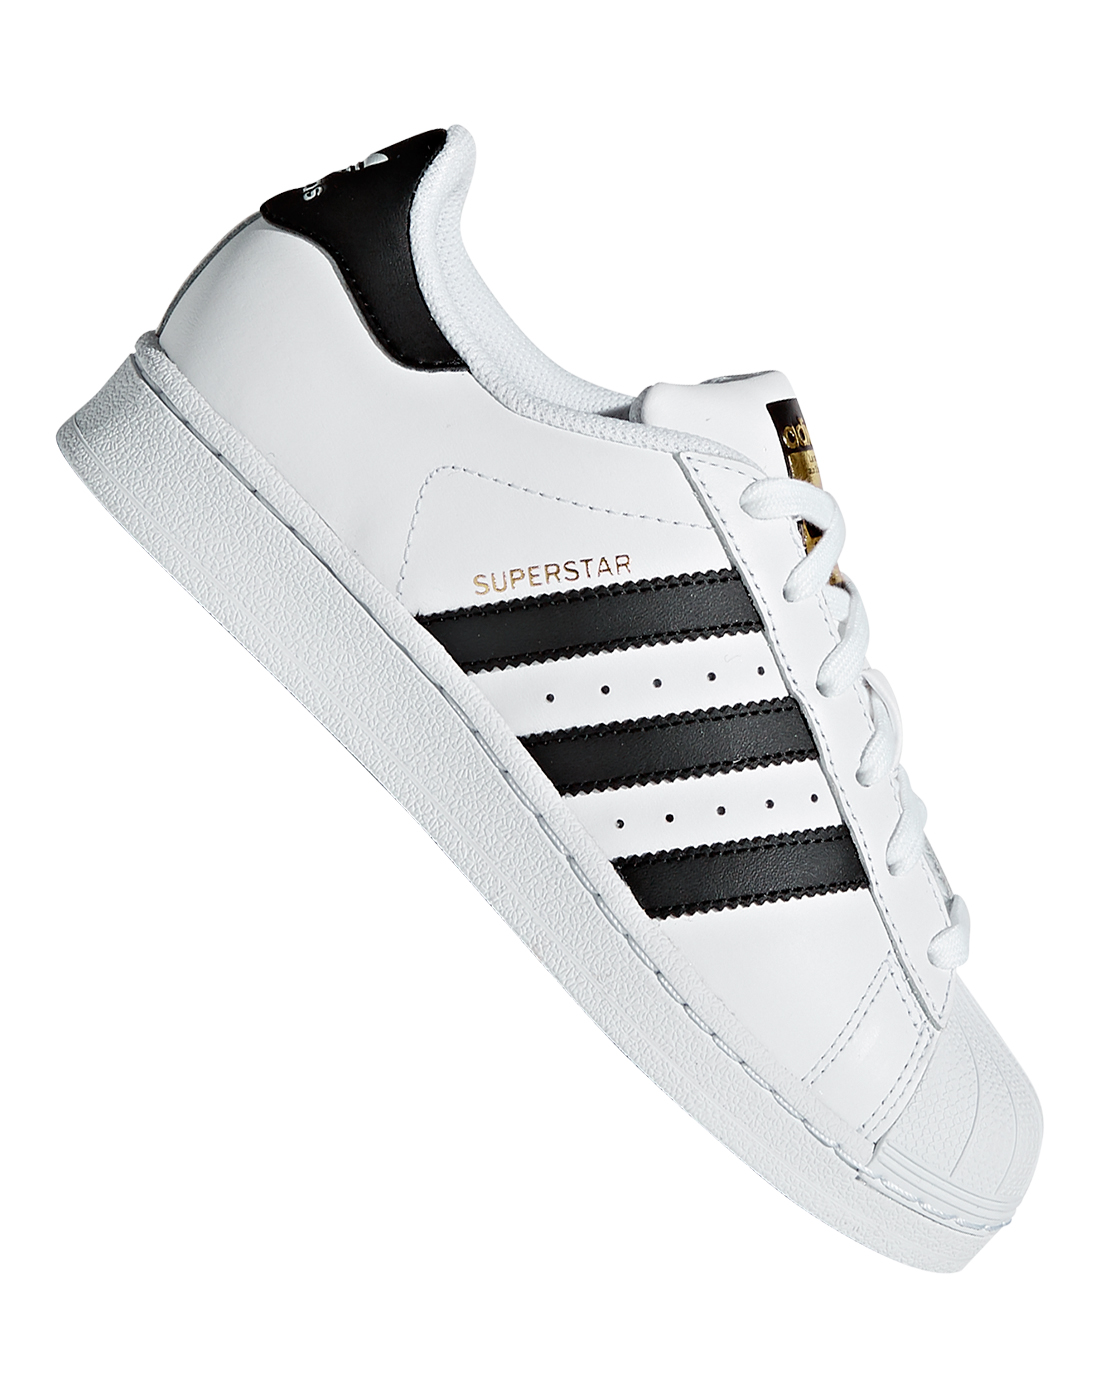 adidas superstar youth size 2